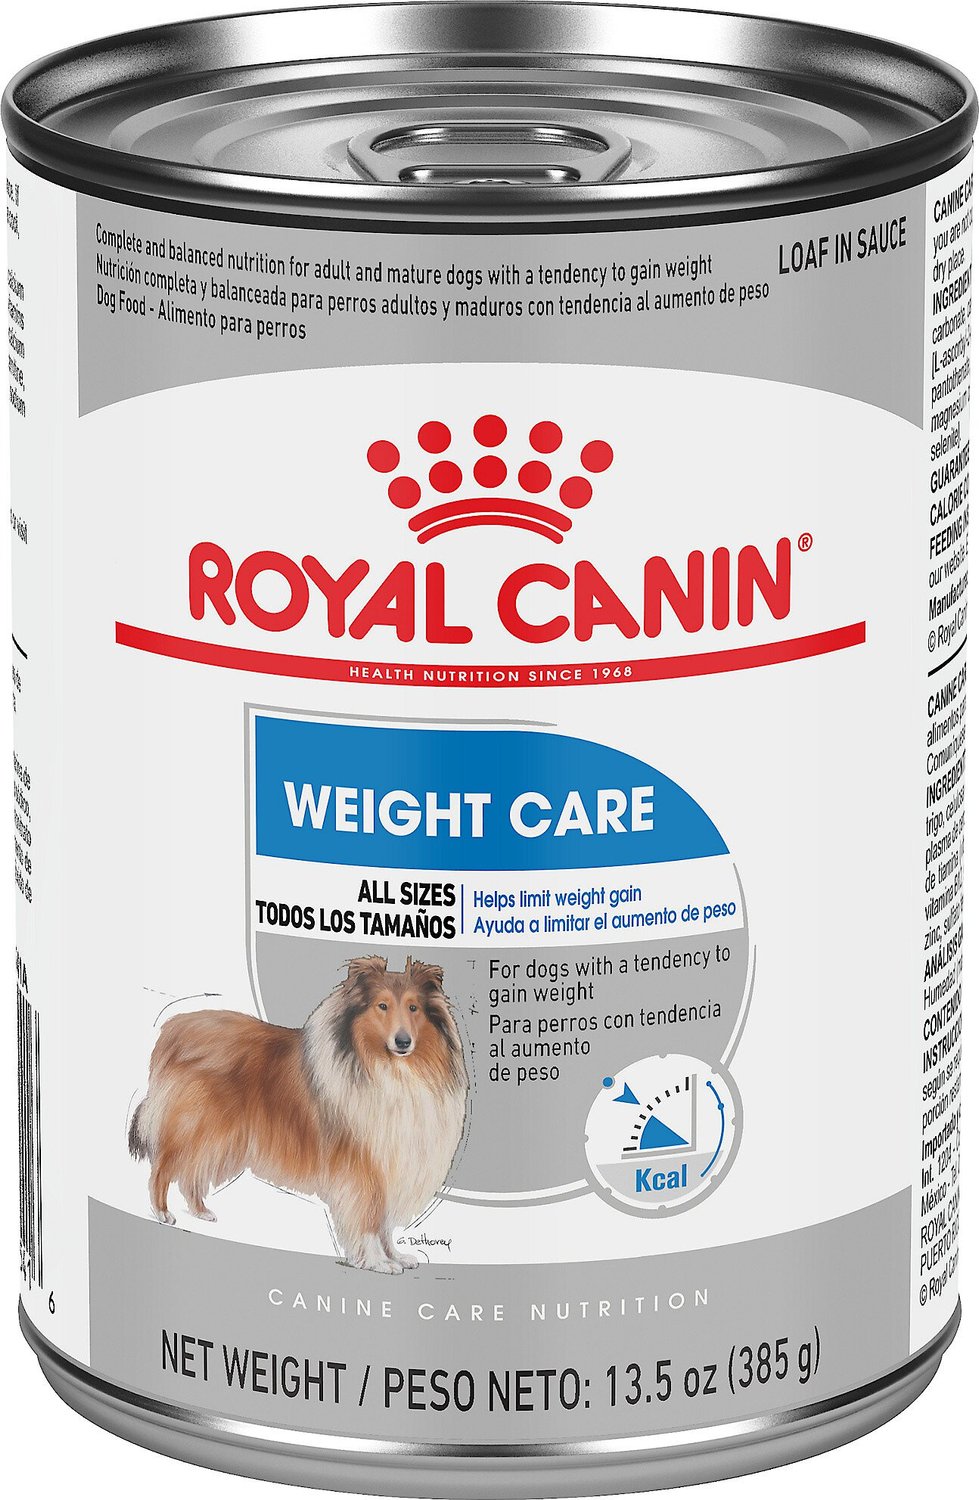 ROYAL CANIN Weight Care Loaf in Sauce Canned Dog Food, 13.5oz, case of